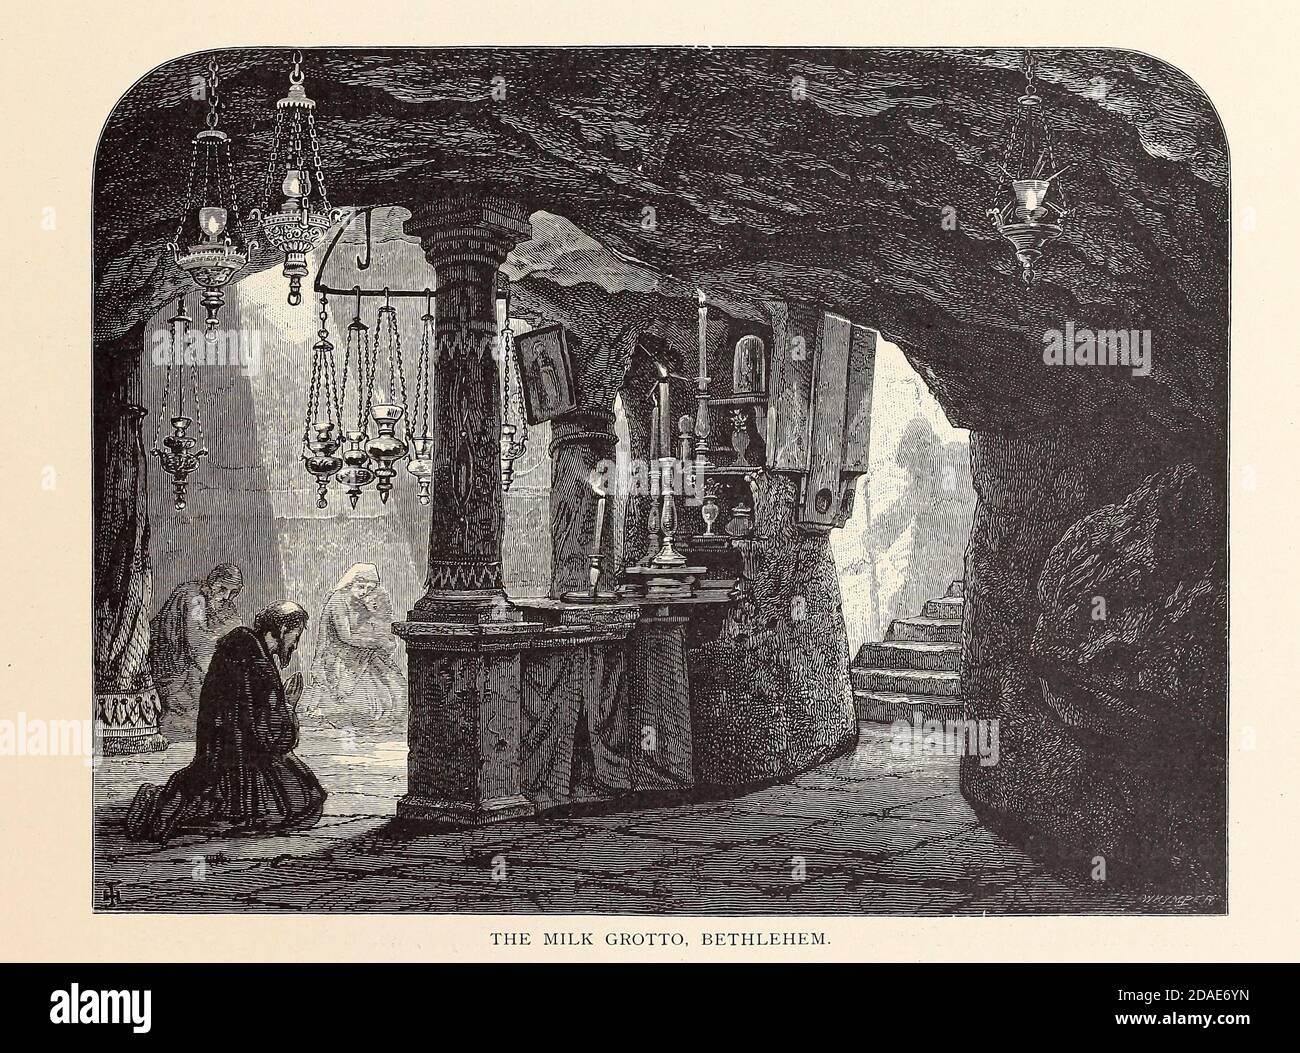 The Milk Grotto, Bethlehem from the book Picturesque Palestine, Sinai, and Egypt By  Colonel Wilson, Charles William, Sir, 1836-1905. Published in New York by D. Appleton and Company in 1881  with engravings in steel and wood from original Drawings by Harry Fenn and J. D. Woodward Volume 1 Stock Photo